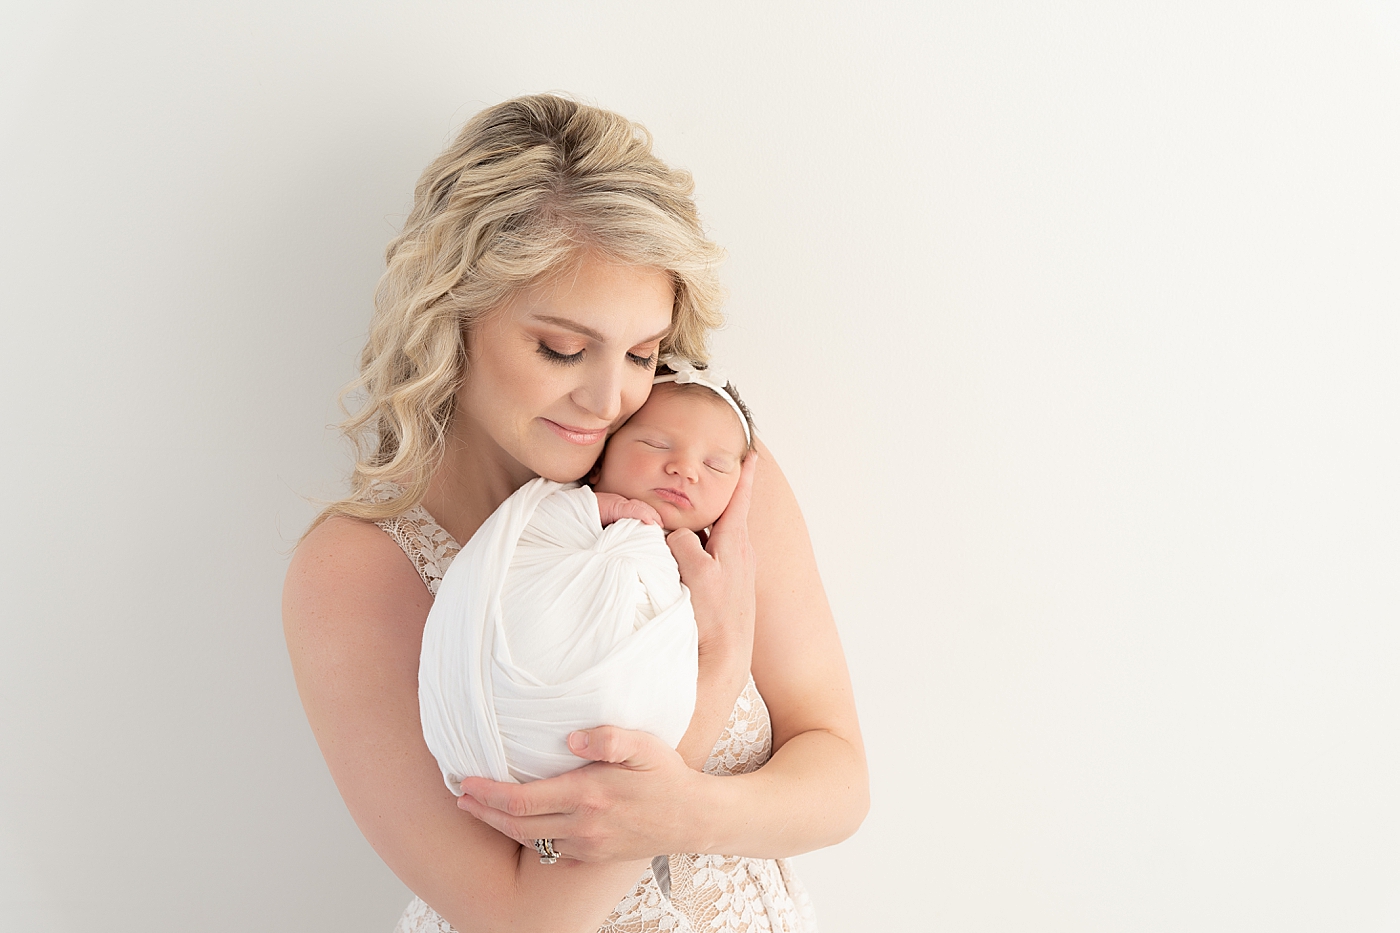 Mom snuggling her baby girl during newborn session. Photo by Rachel Brookes Photography.